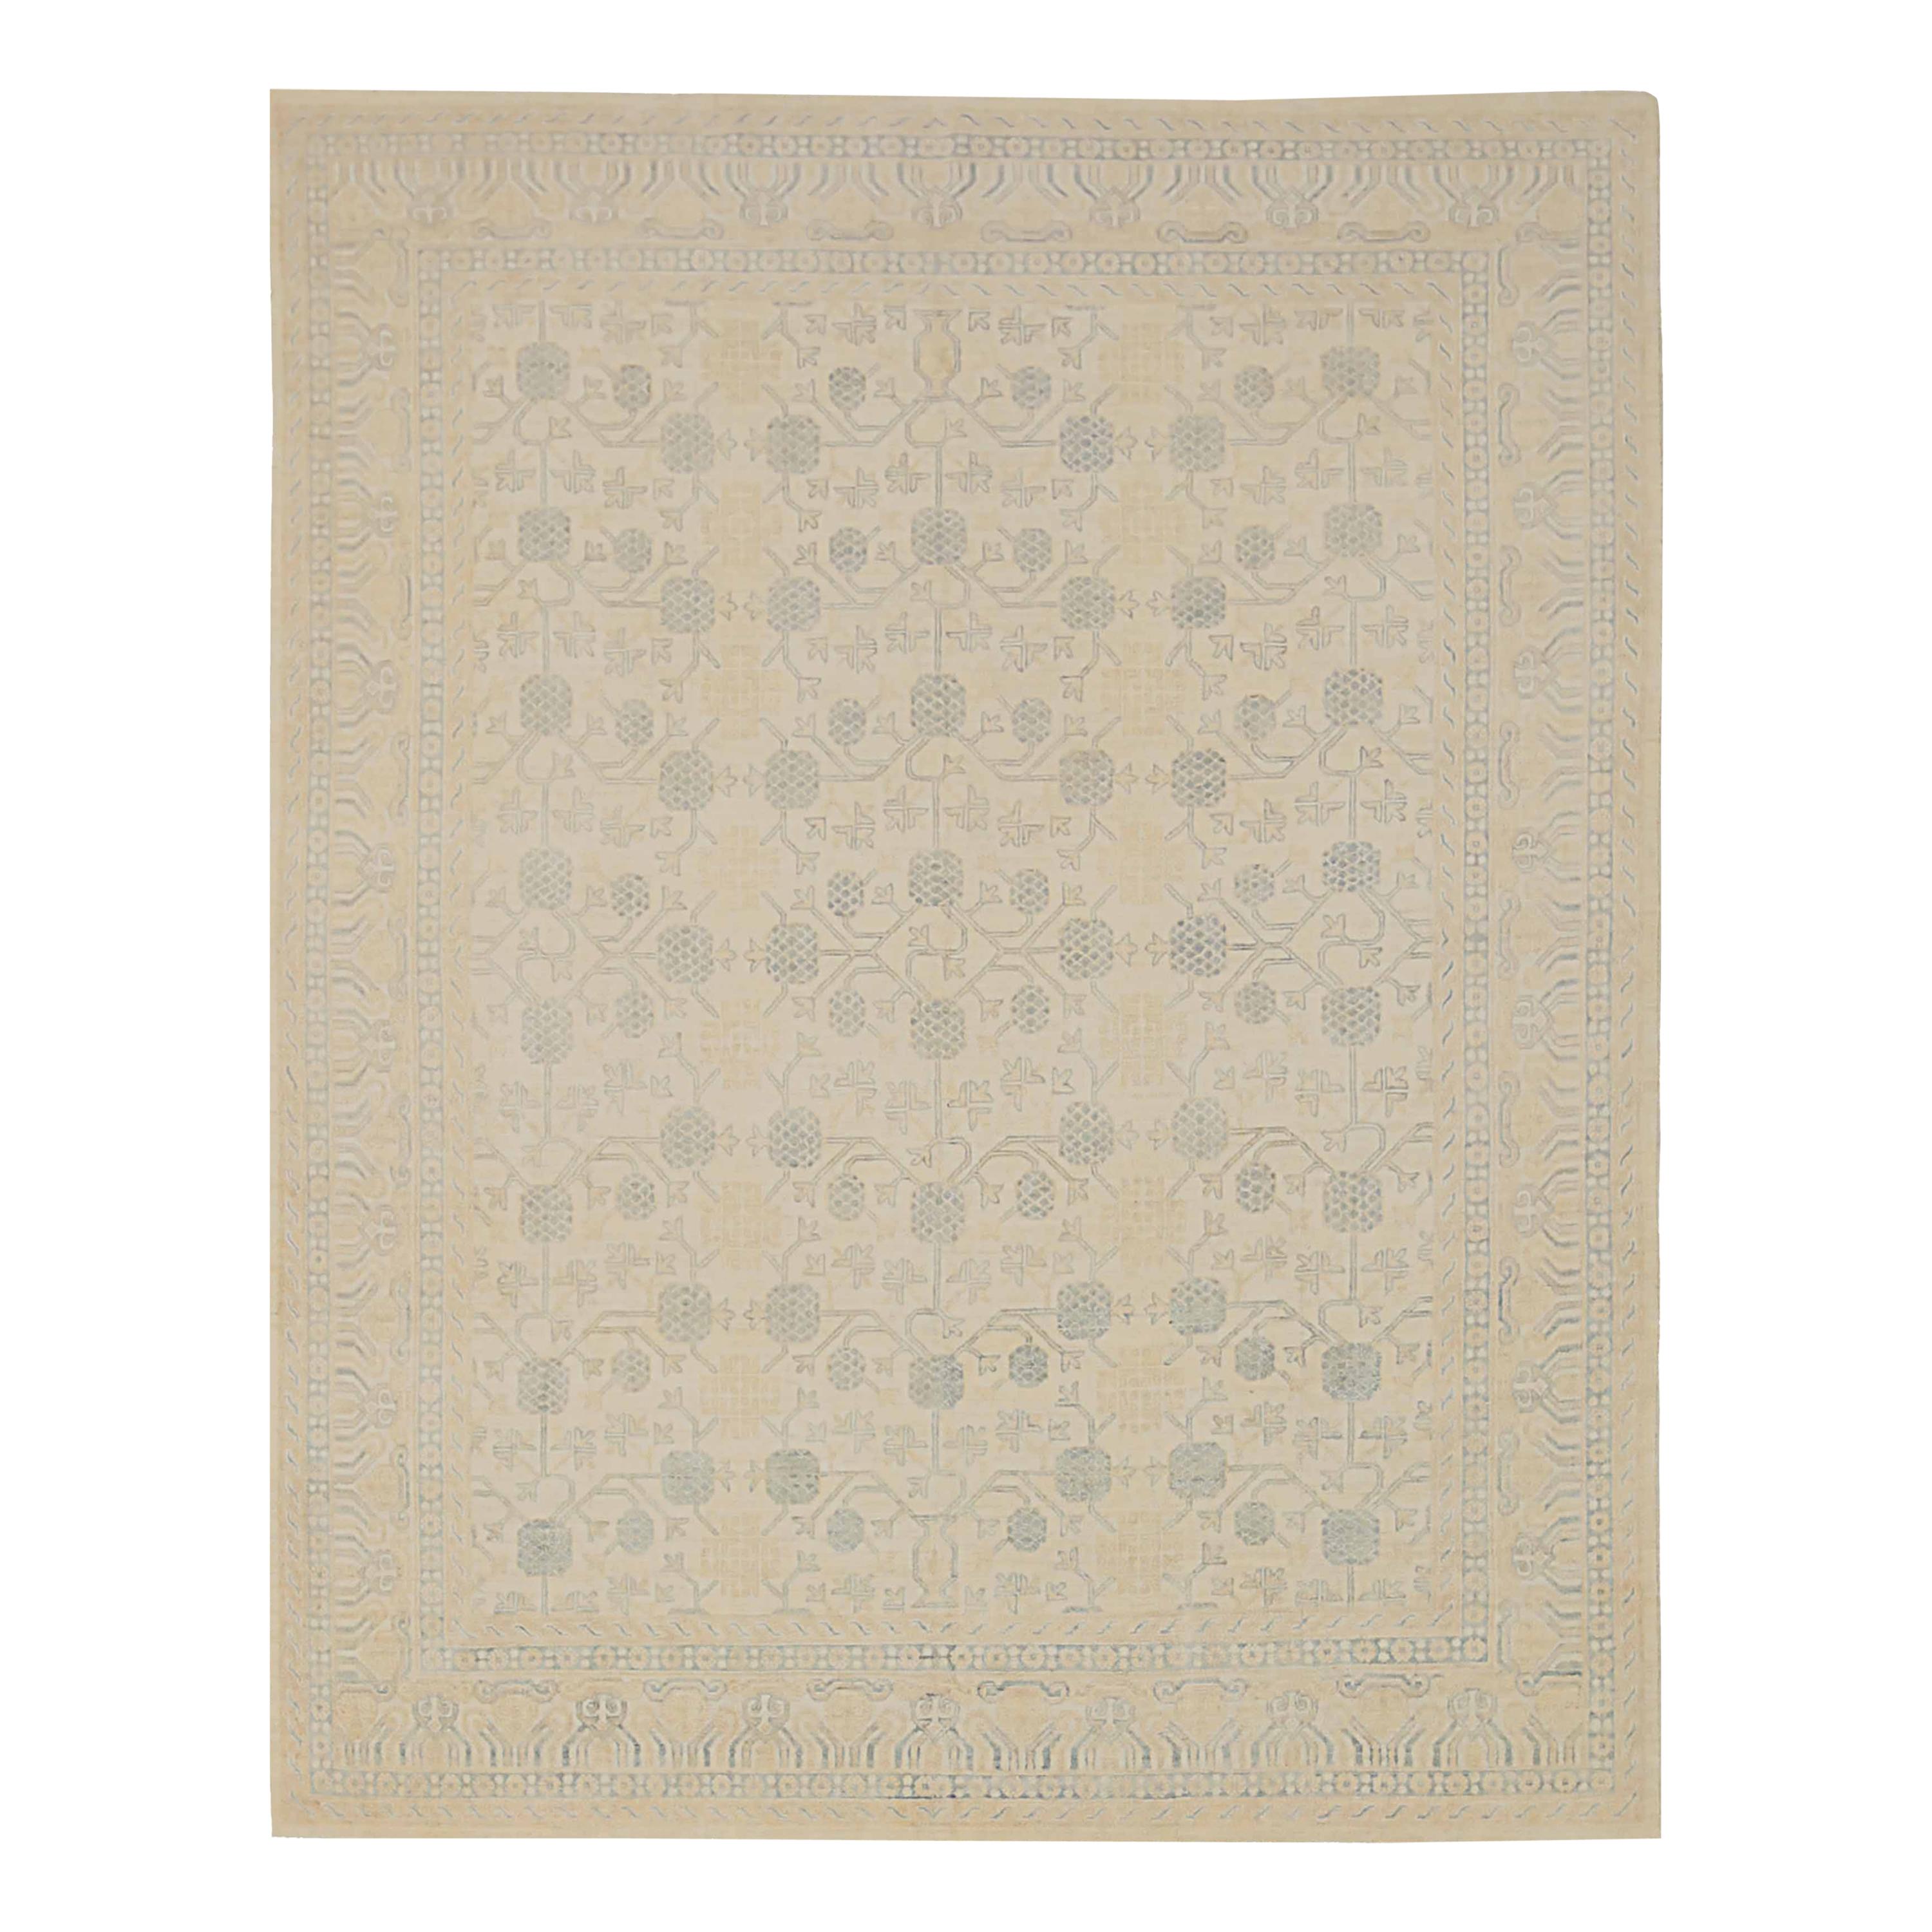 New Tabriz Style Afghan Area Rug with '17th-Century' Look